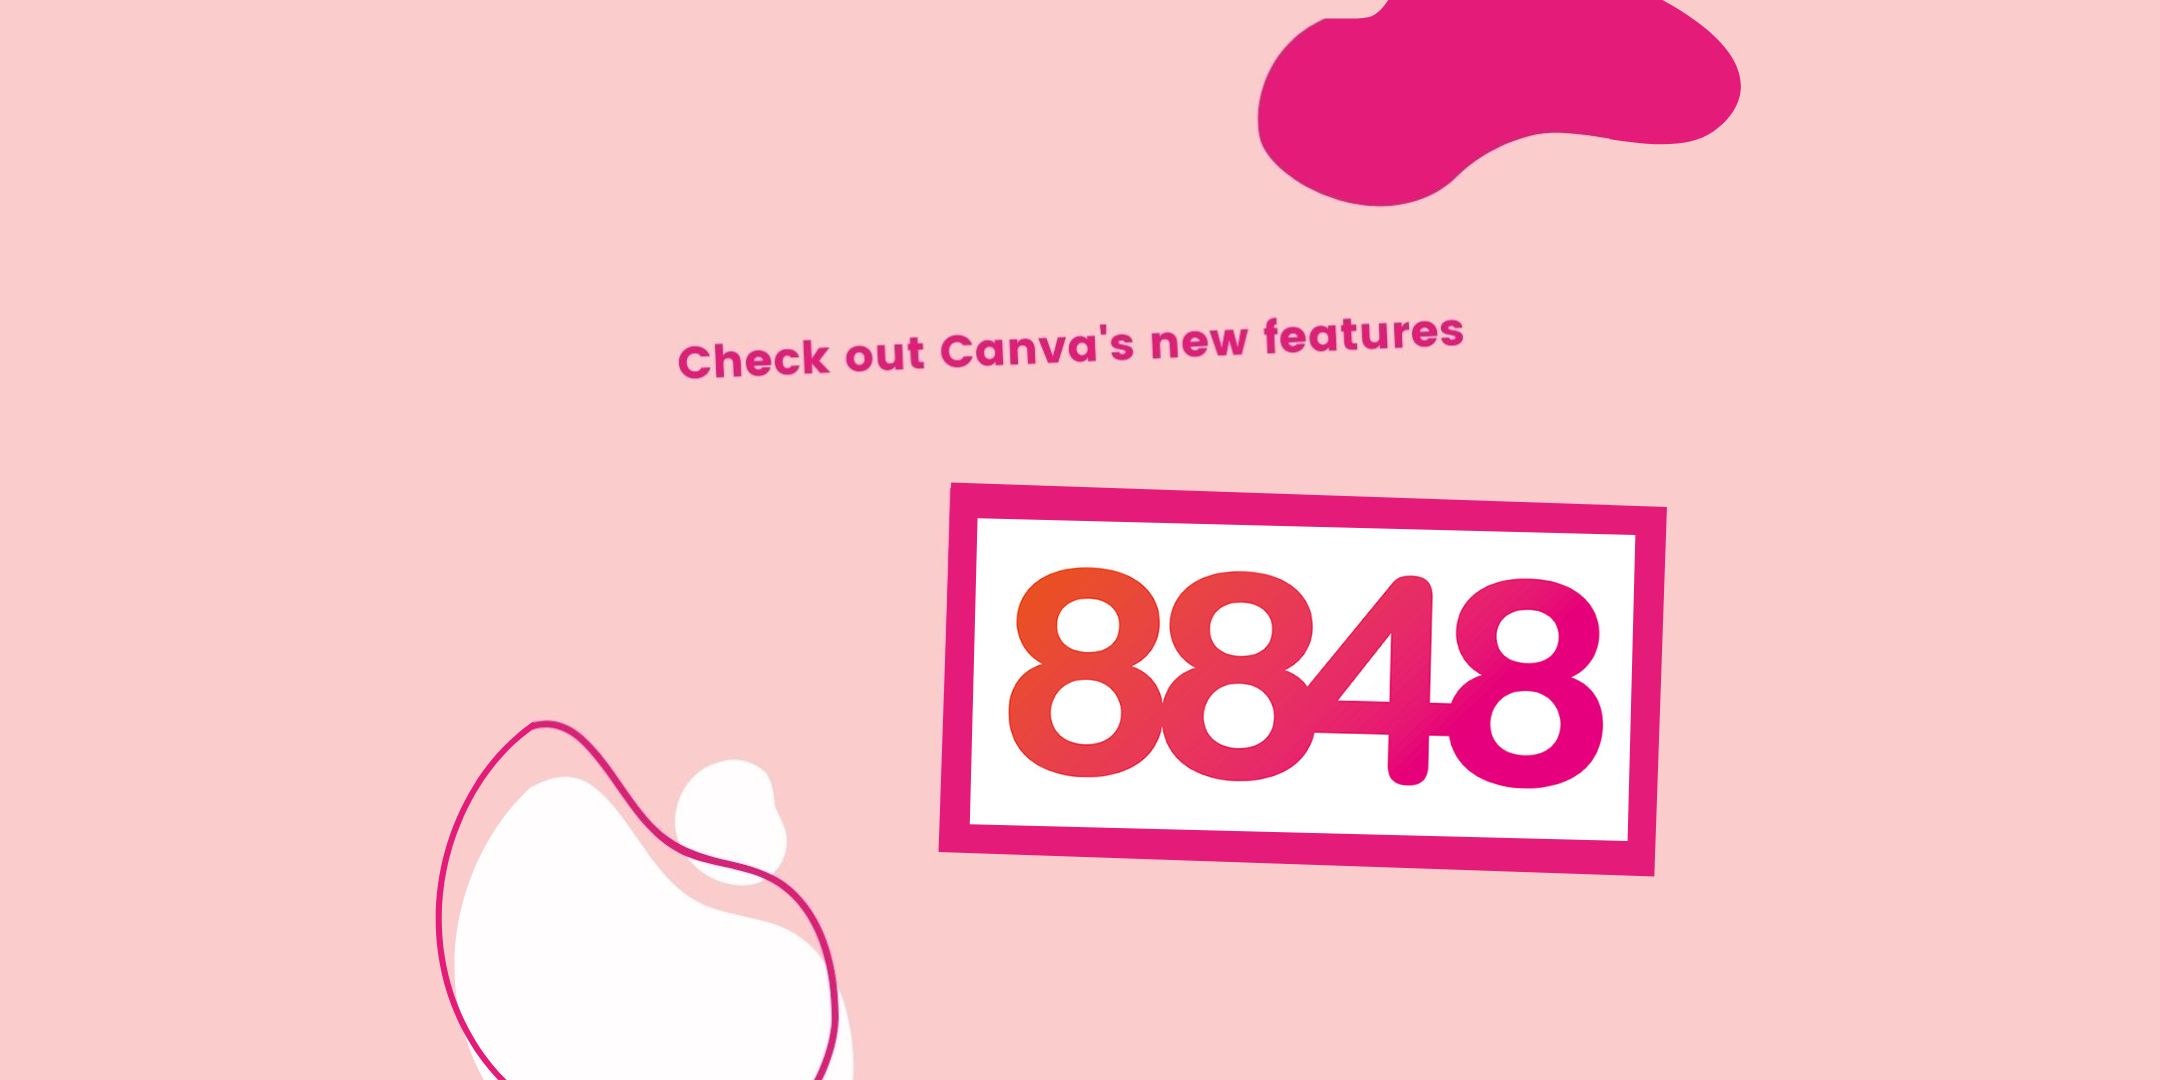 Check out Canva’s new features